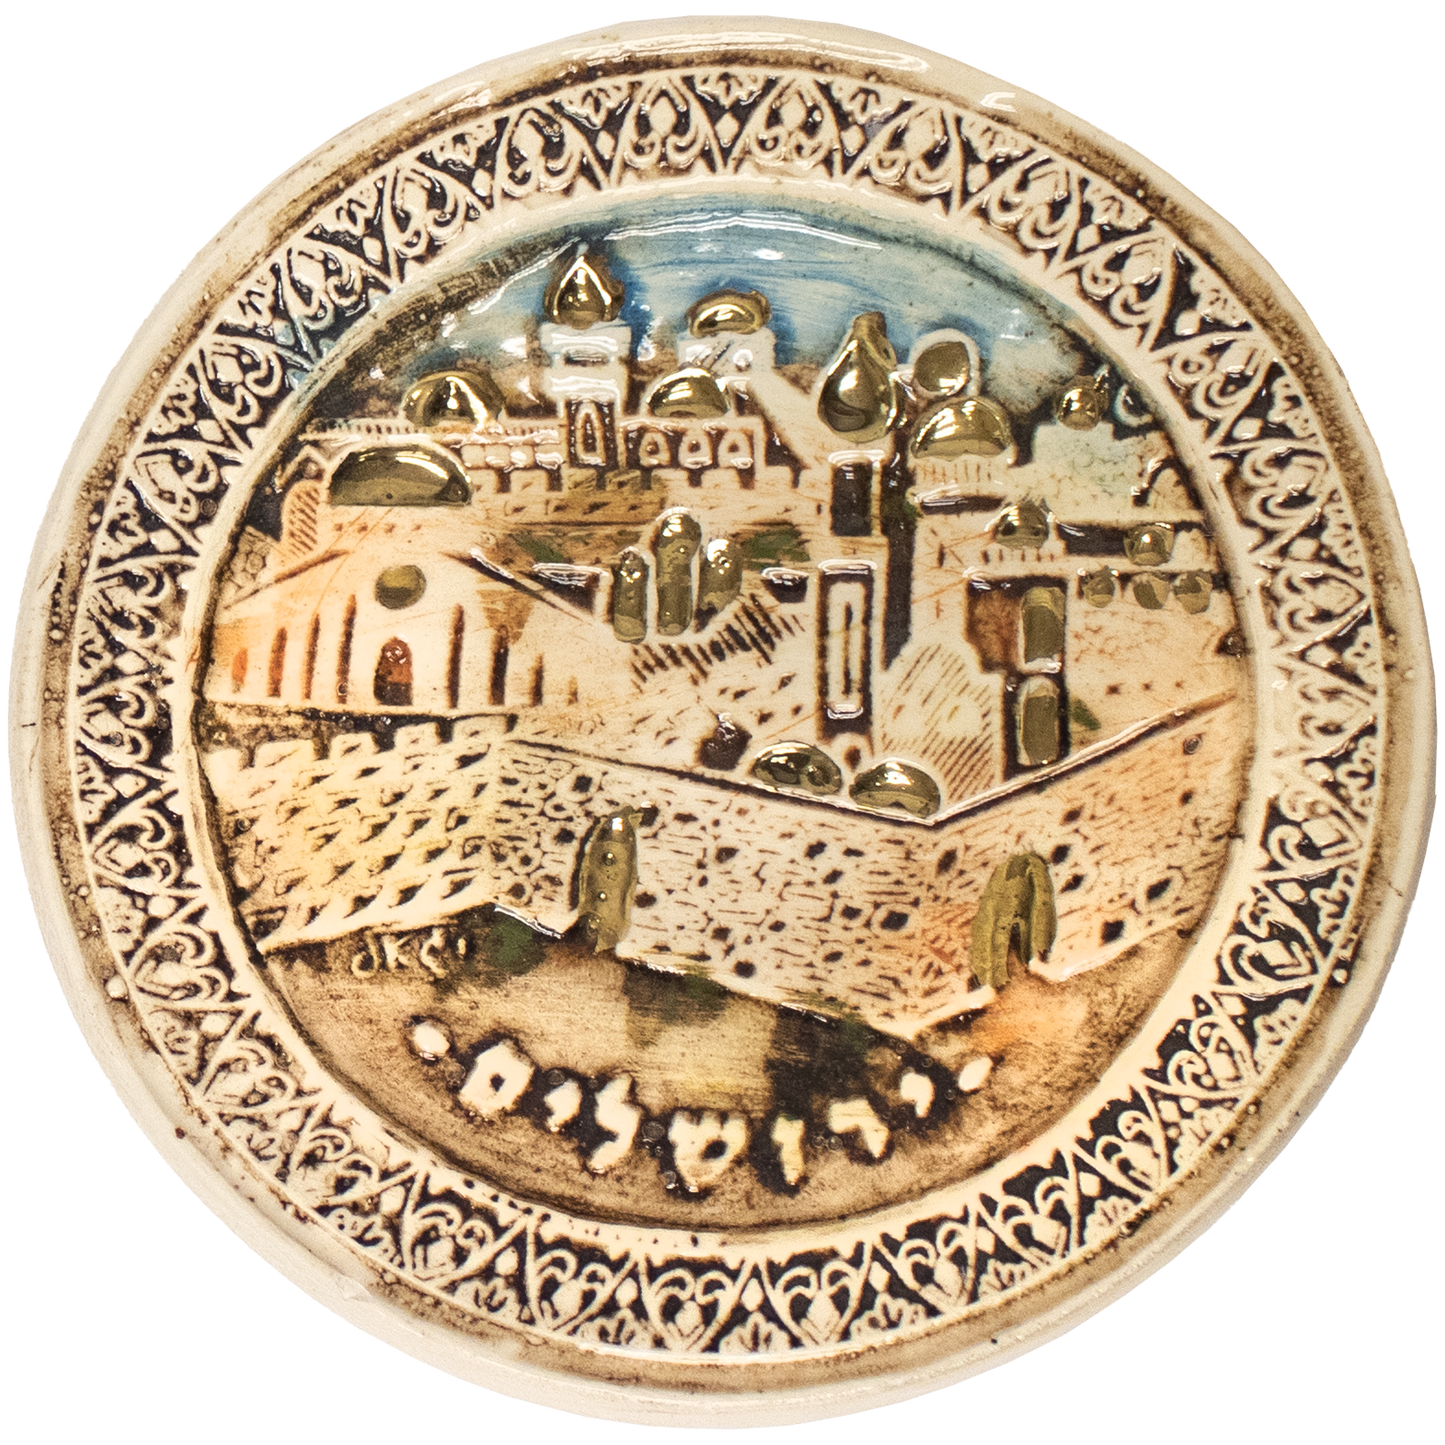 Made in Israel Hand Painted Jerusalem Decorative Plate Ceramic Small